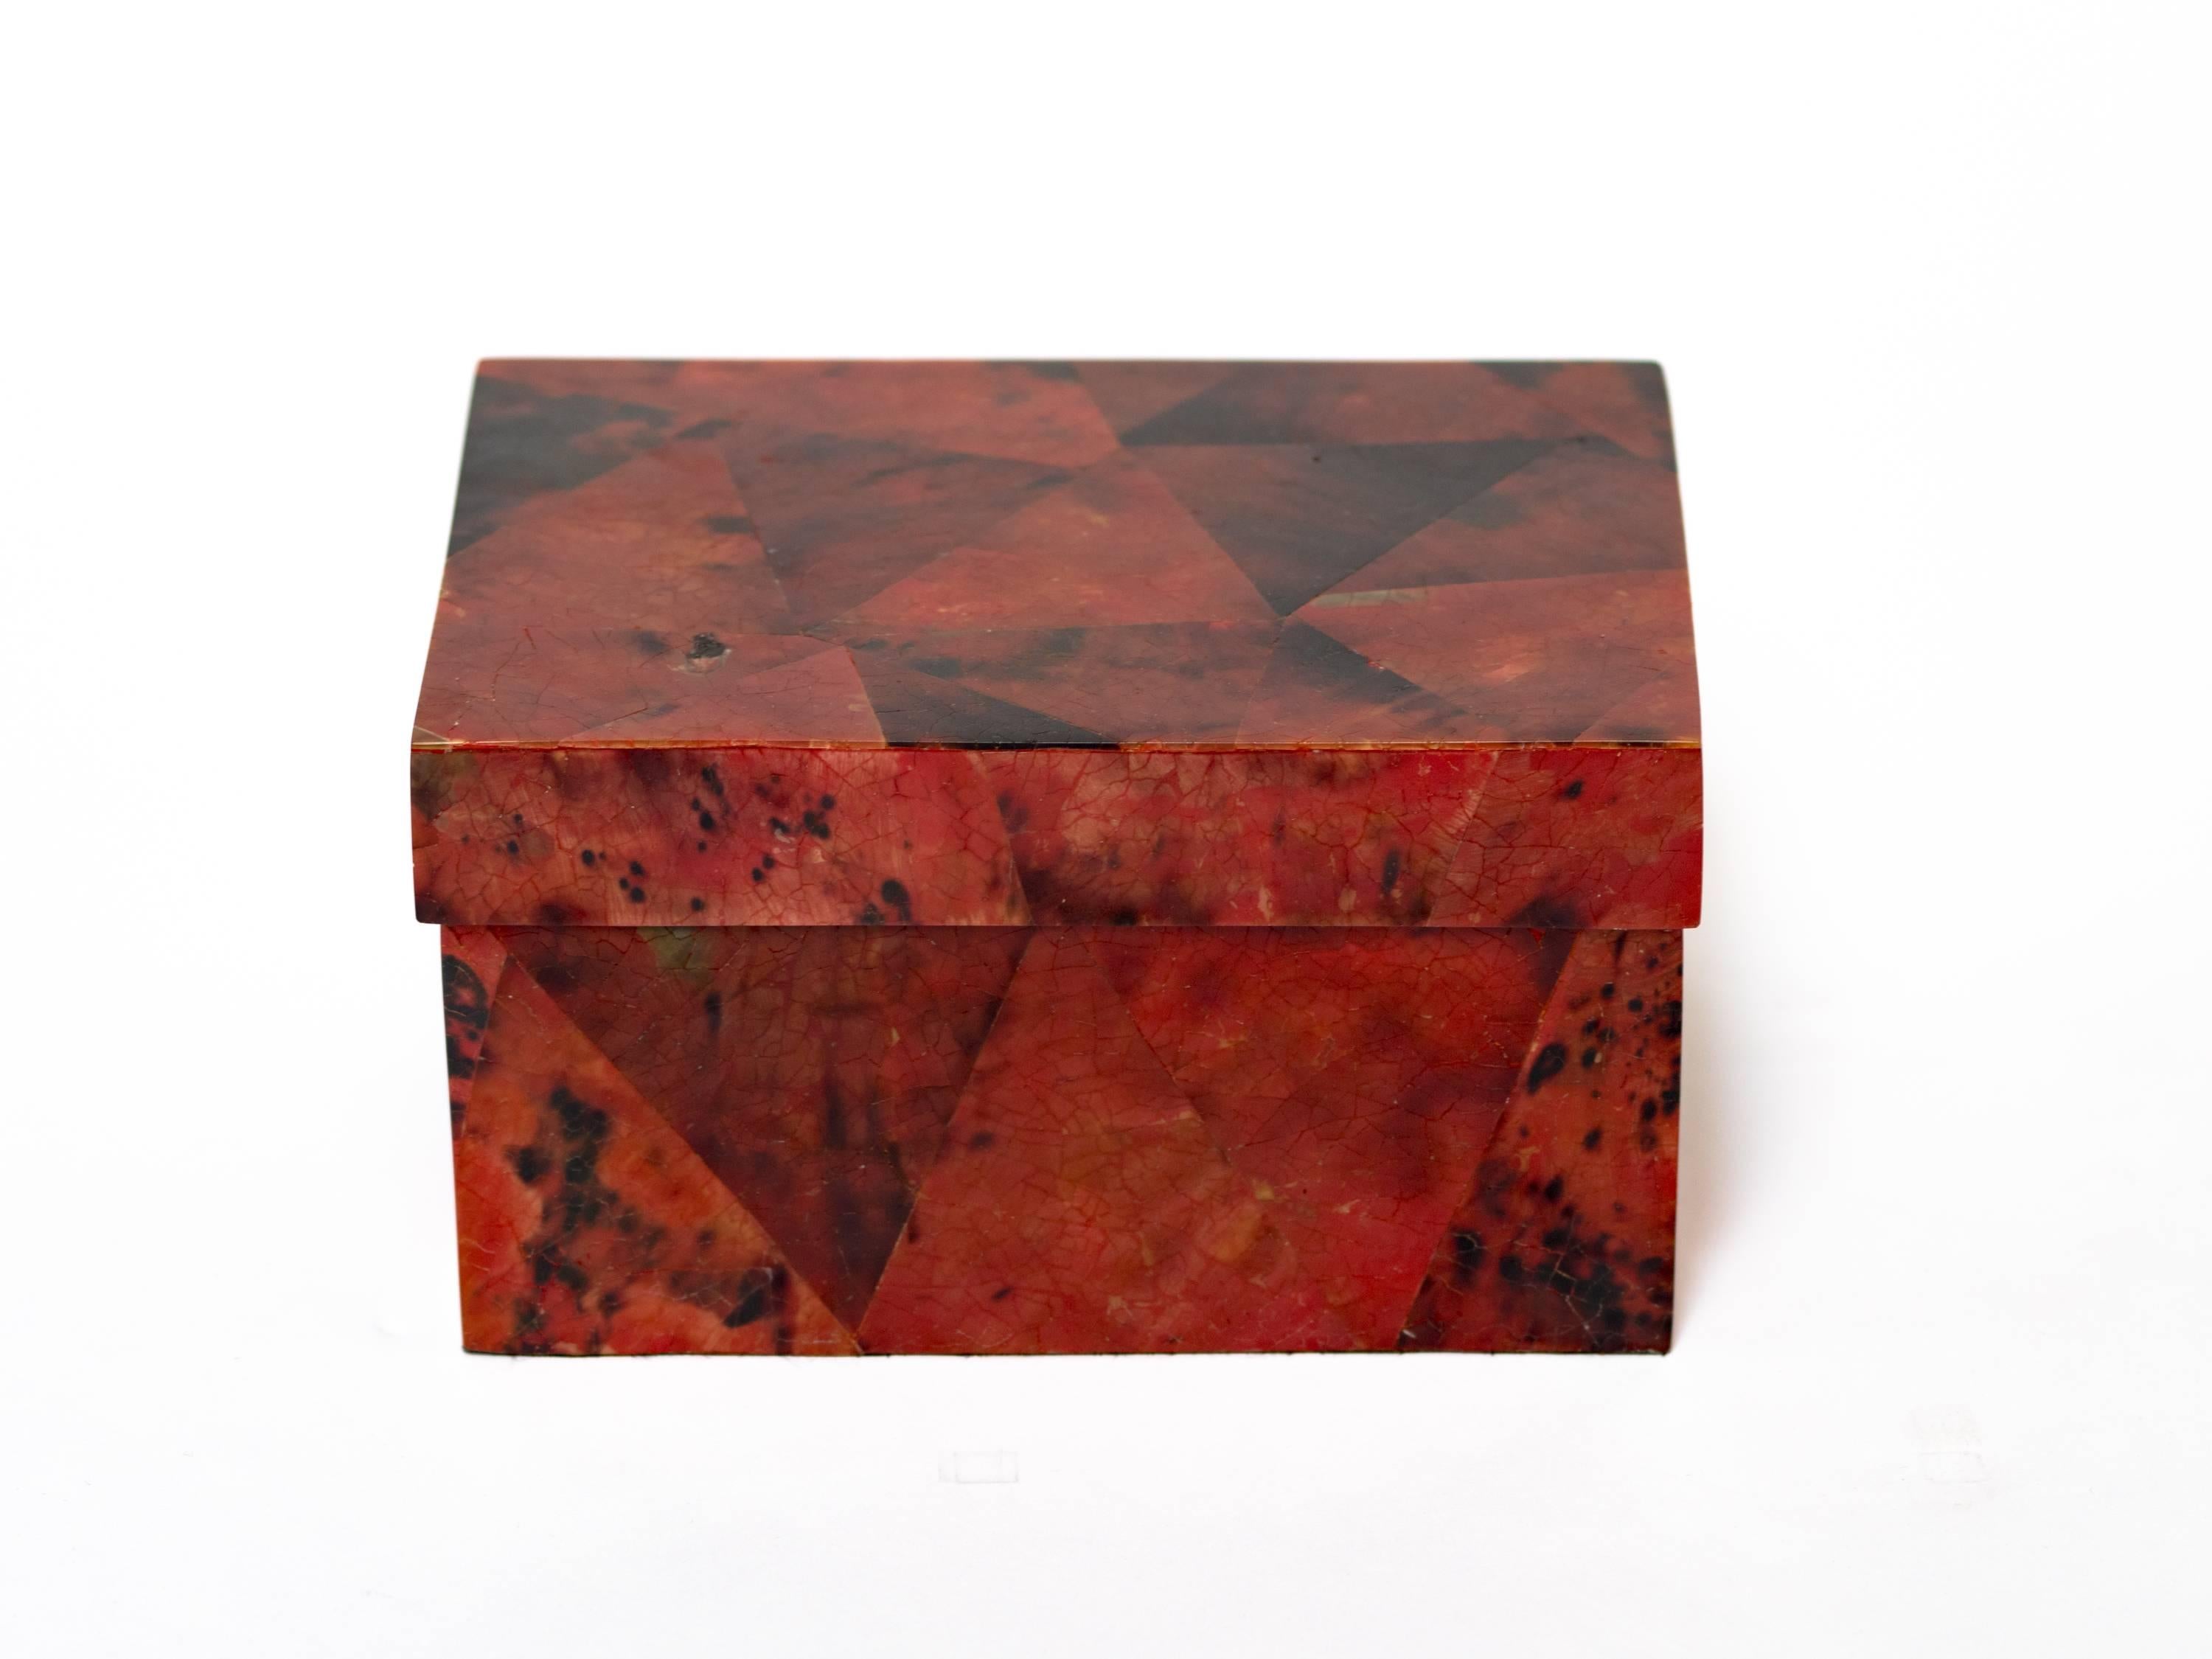 Gorgeous handcrafted box comprised of lacquered pen shell. Hand-dyed in variant hues of ruby red and black. The box has a graphic mosaic geometric design. The lid opens to reveal a palmwood interior. Makes a great jewelry box or desk accessory.